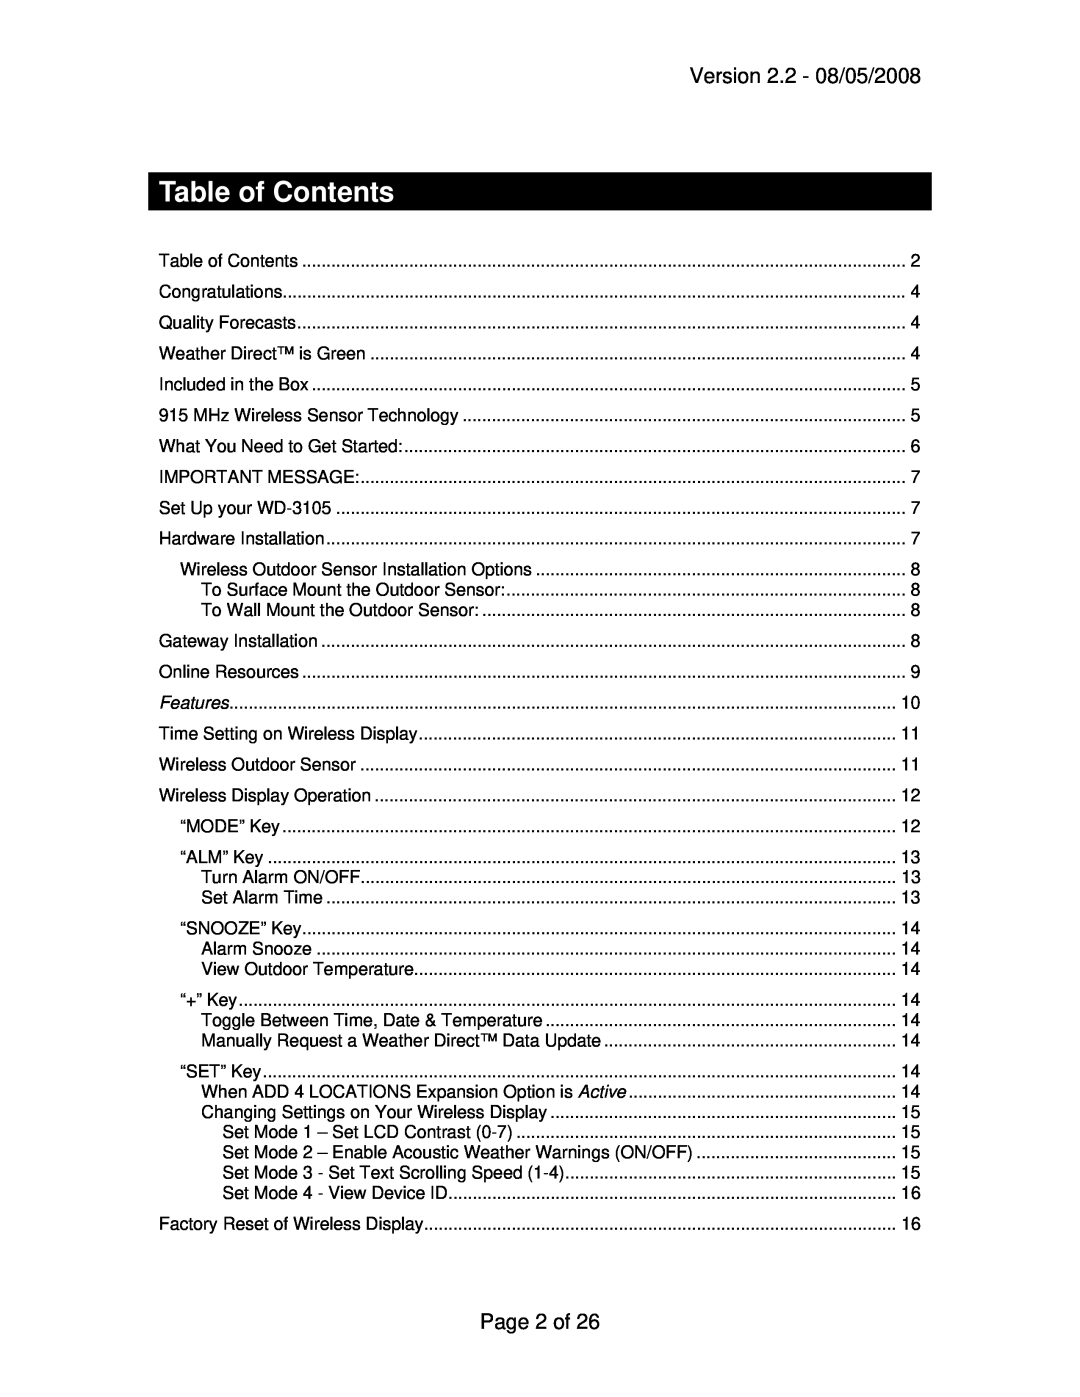 La Crosse Technology WD-3105 owner manual Table of Contents, Version 2.2 - 08/05/2008, Page 2 of 